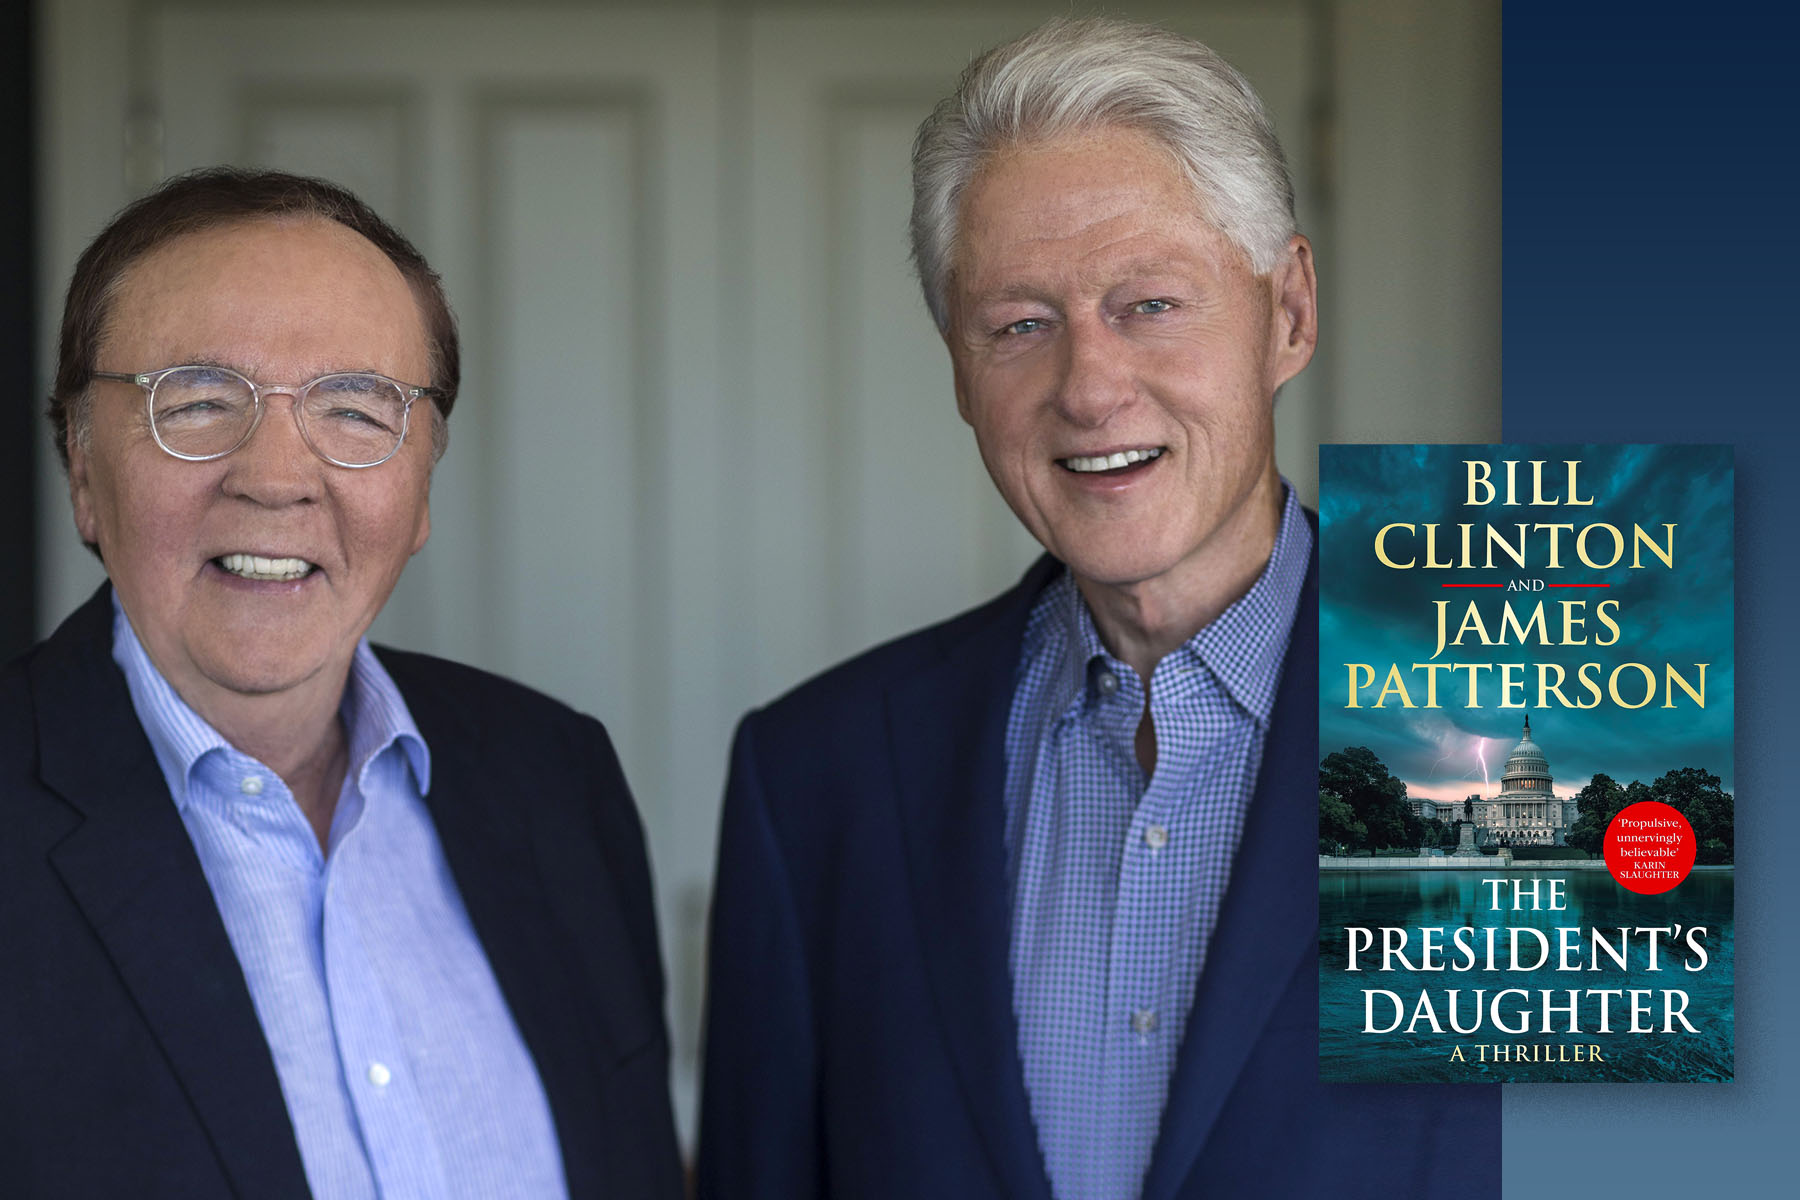 Co-authors James Patterson and former US president Bill Clinton smile, in suits, in front of a set of white doors, with their new novel The President's Daughter overlaid next to them.